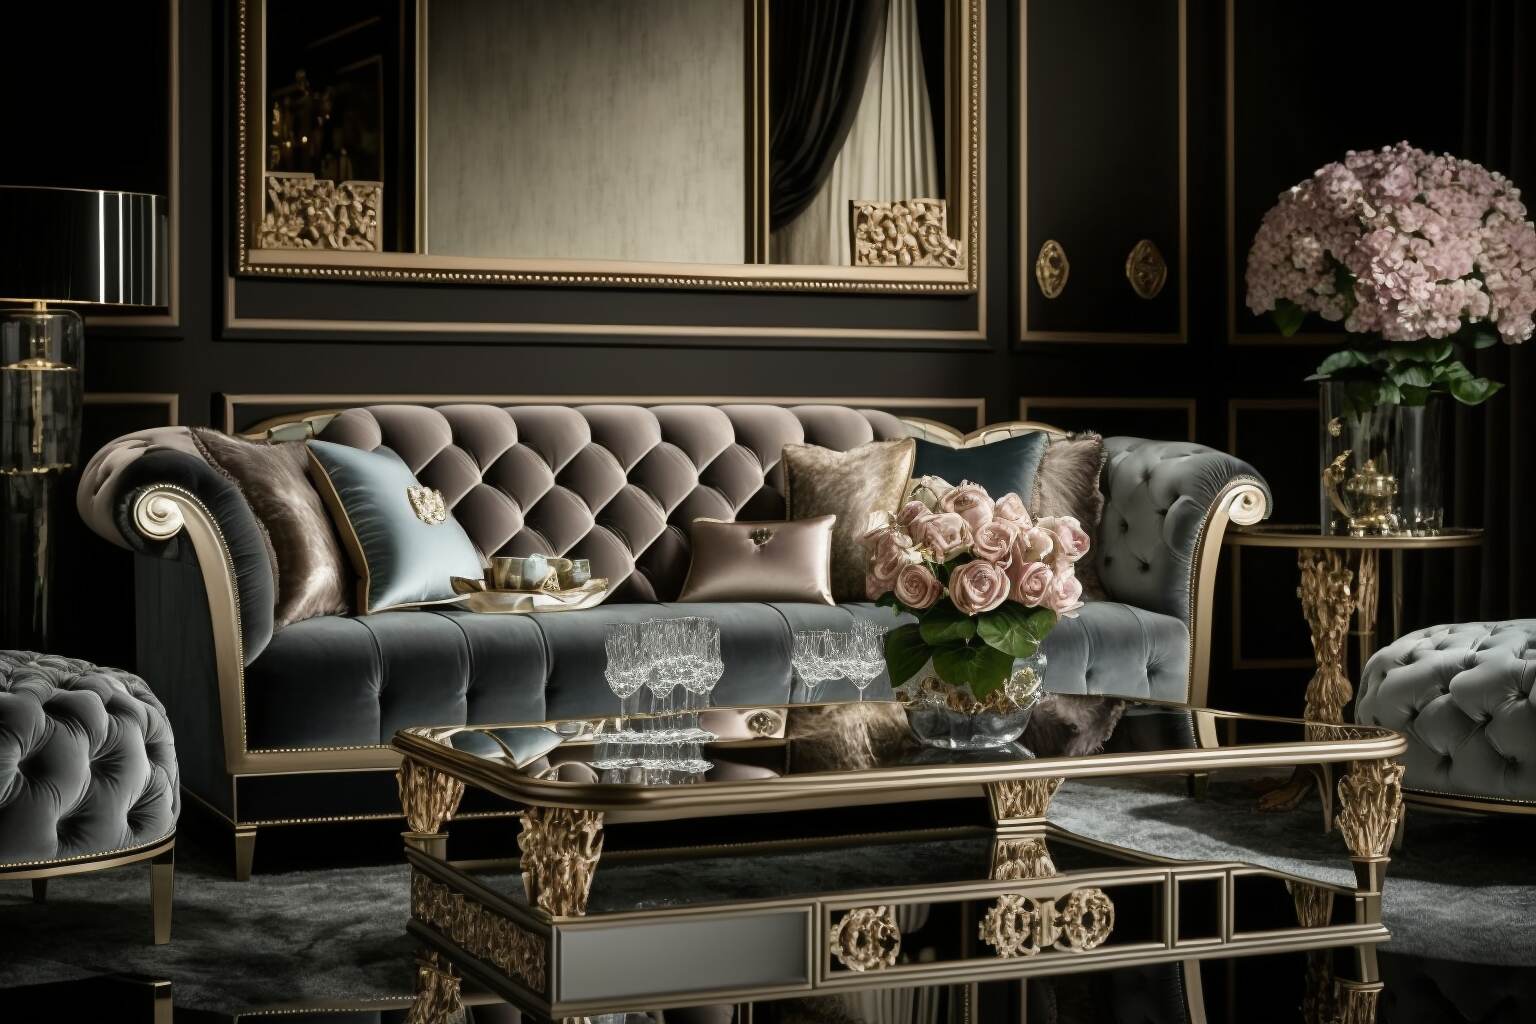 Luxurious Living Space With Marionis Signature Style Furnishings